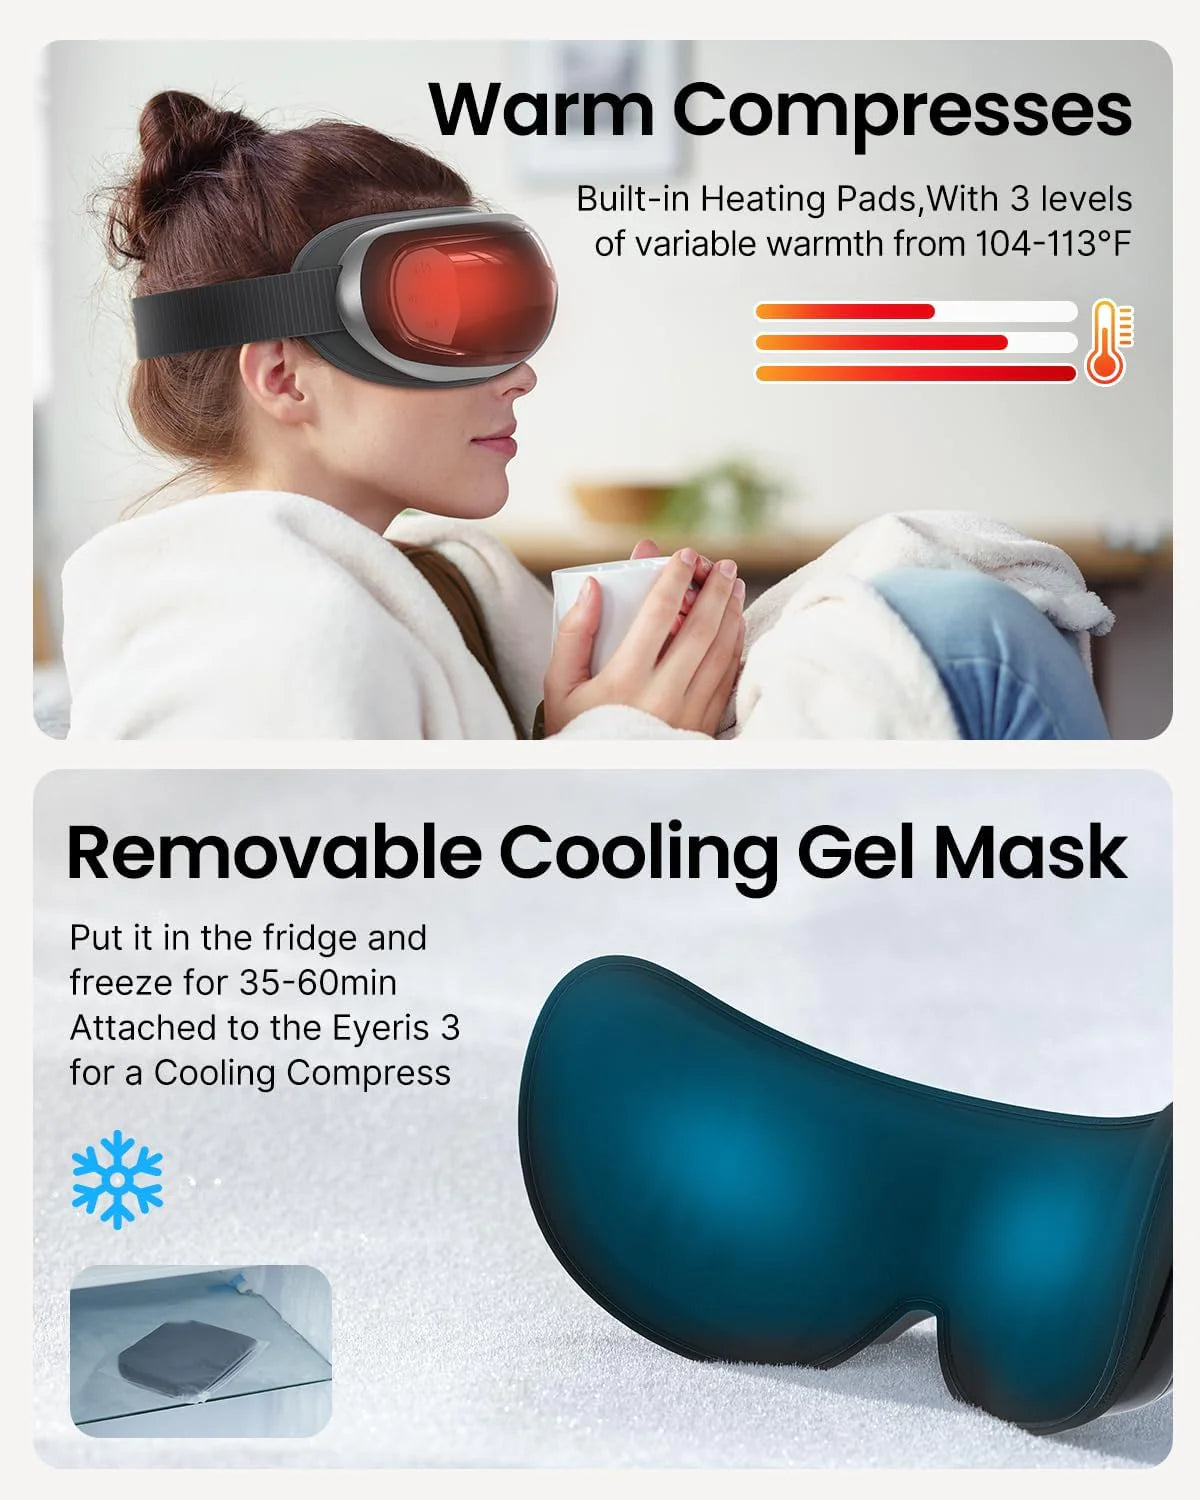 A woman wearing a Renpho EU Eyeris 3 Eye Massager with heating pads is featured. Below, a cooling gel eye mask, described as removable and freezable, is displayed. Temperature ranges for each mask are indicated.